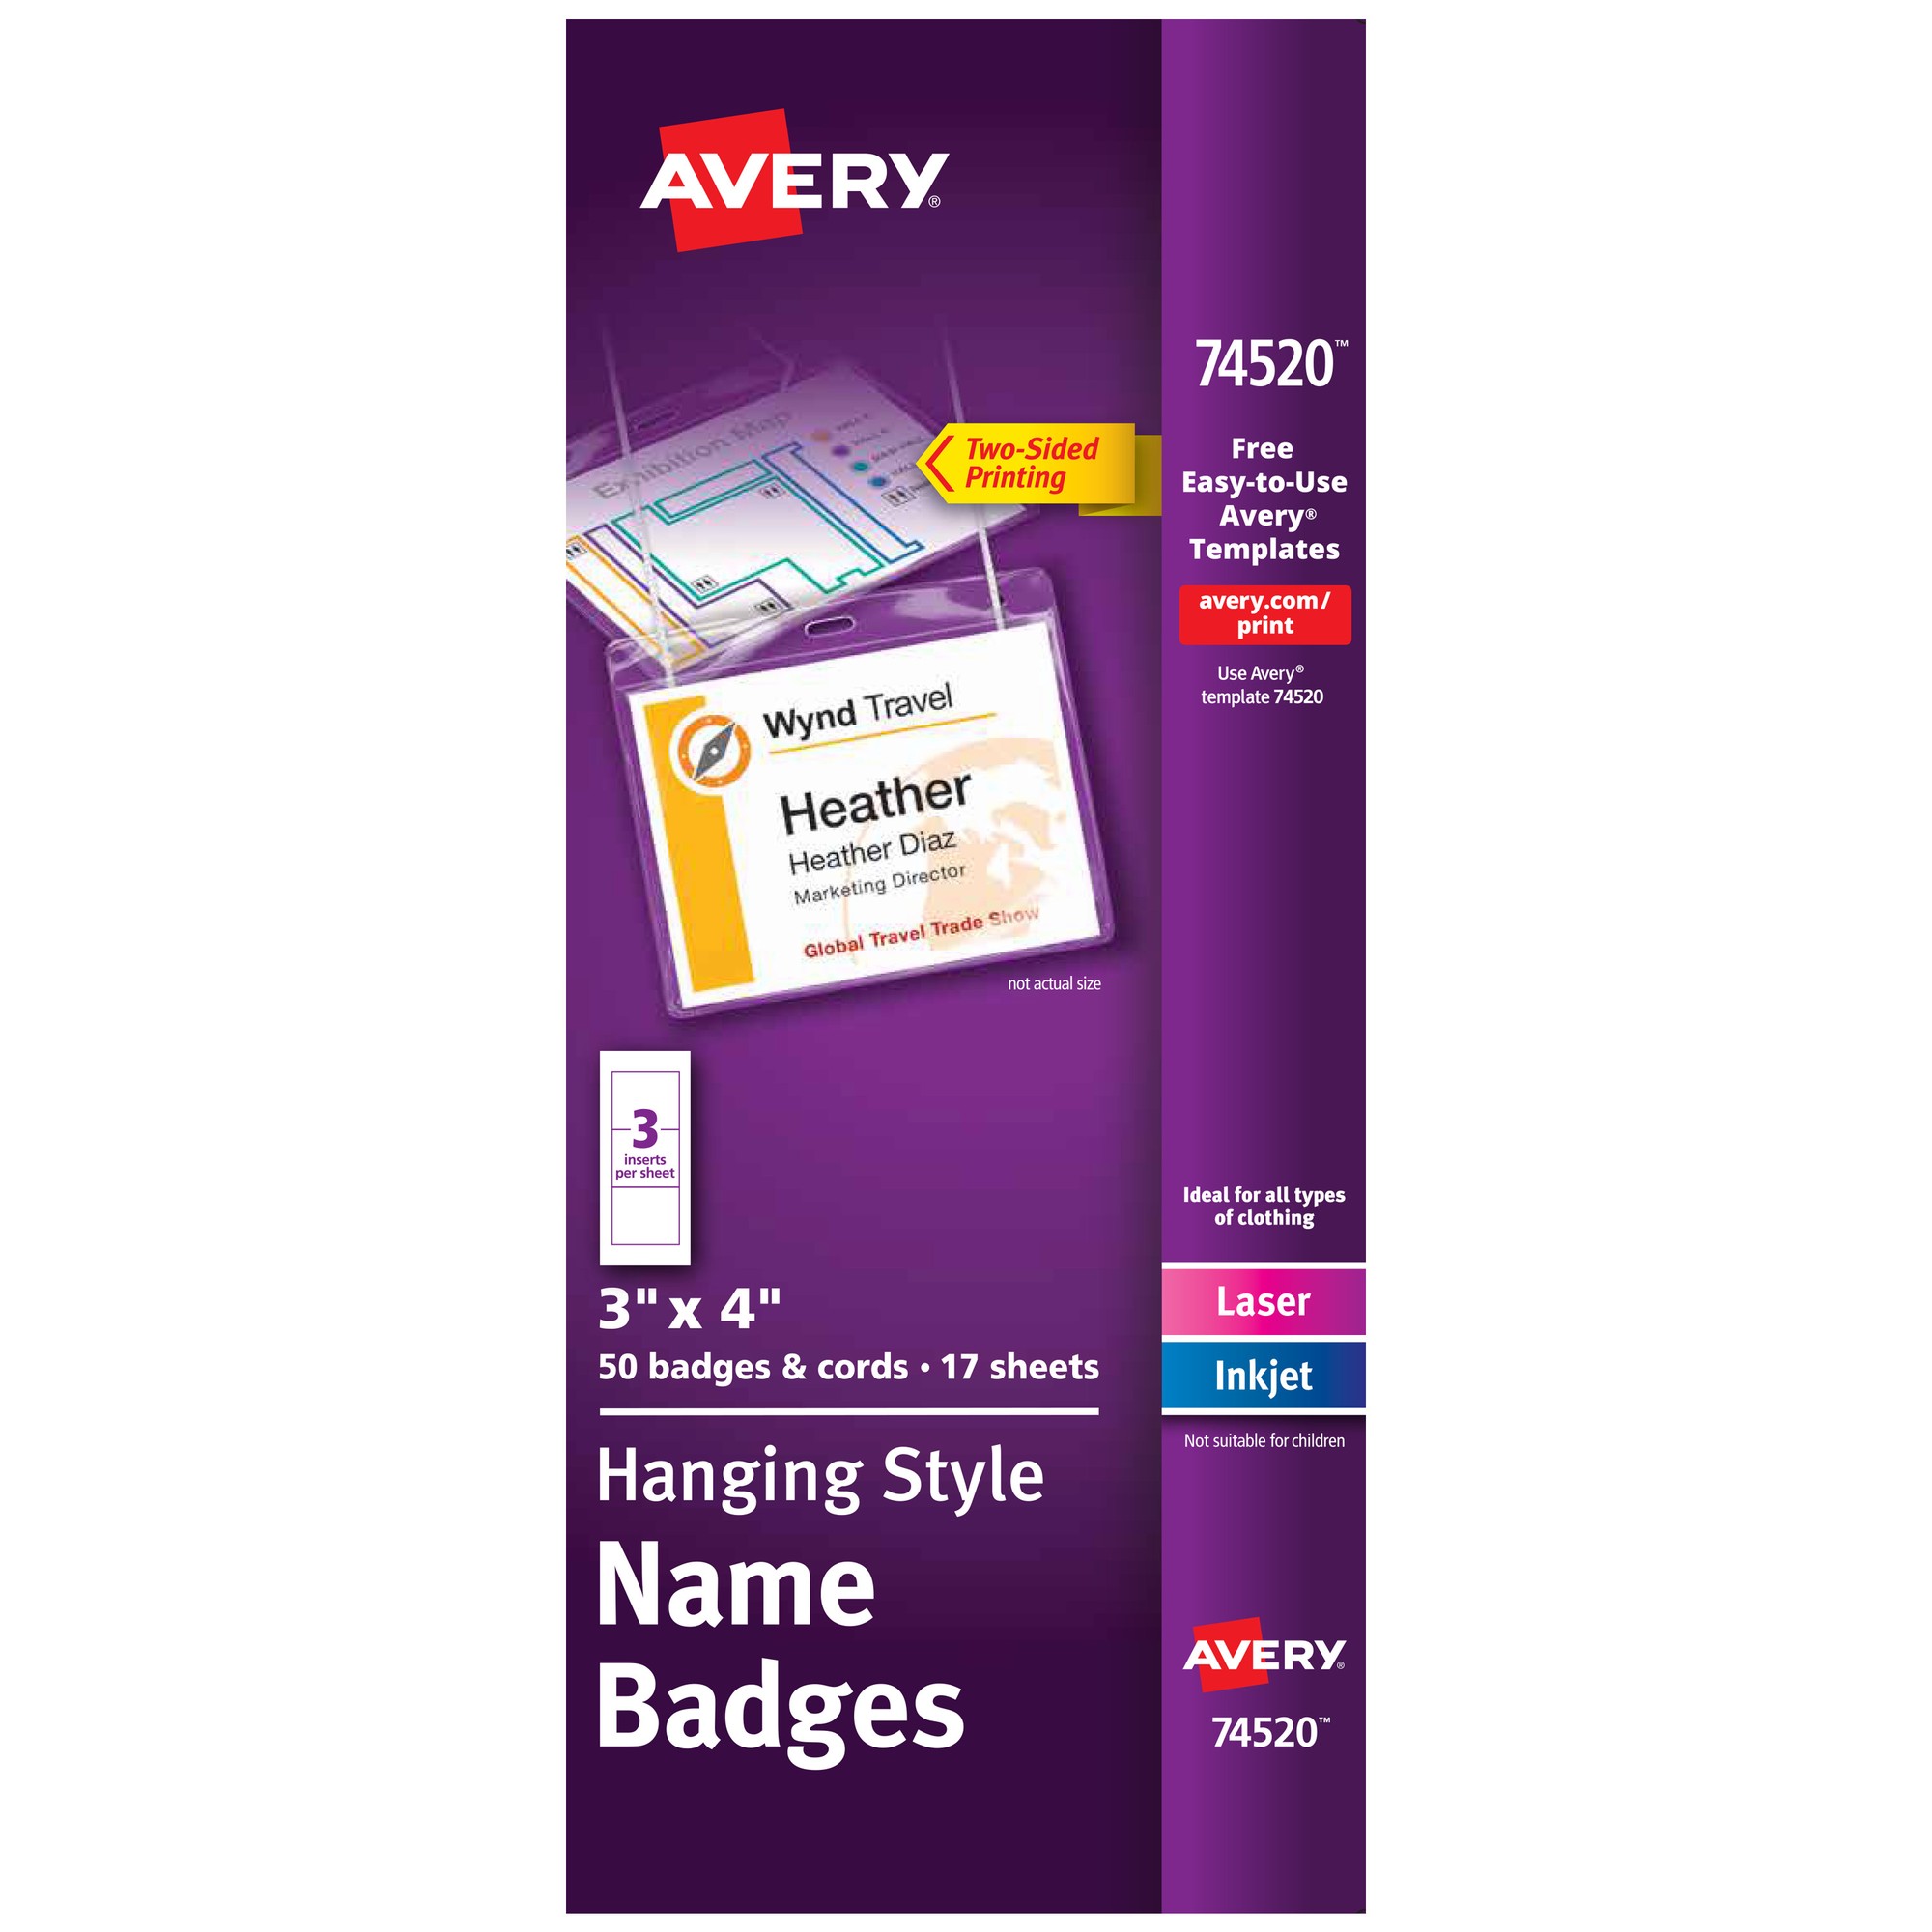 Avery Hanging Style Name Badges - 4" x 3" - 50 / Box - Durable, Micro Perforated, Printable, PVC-free